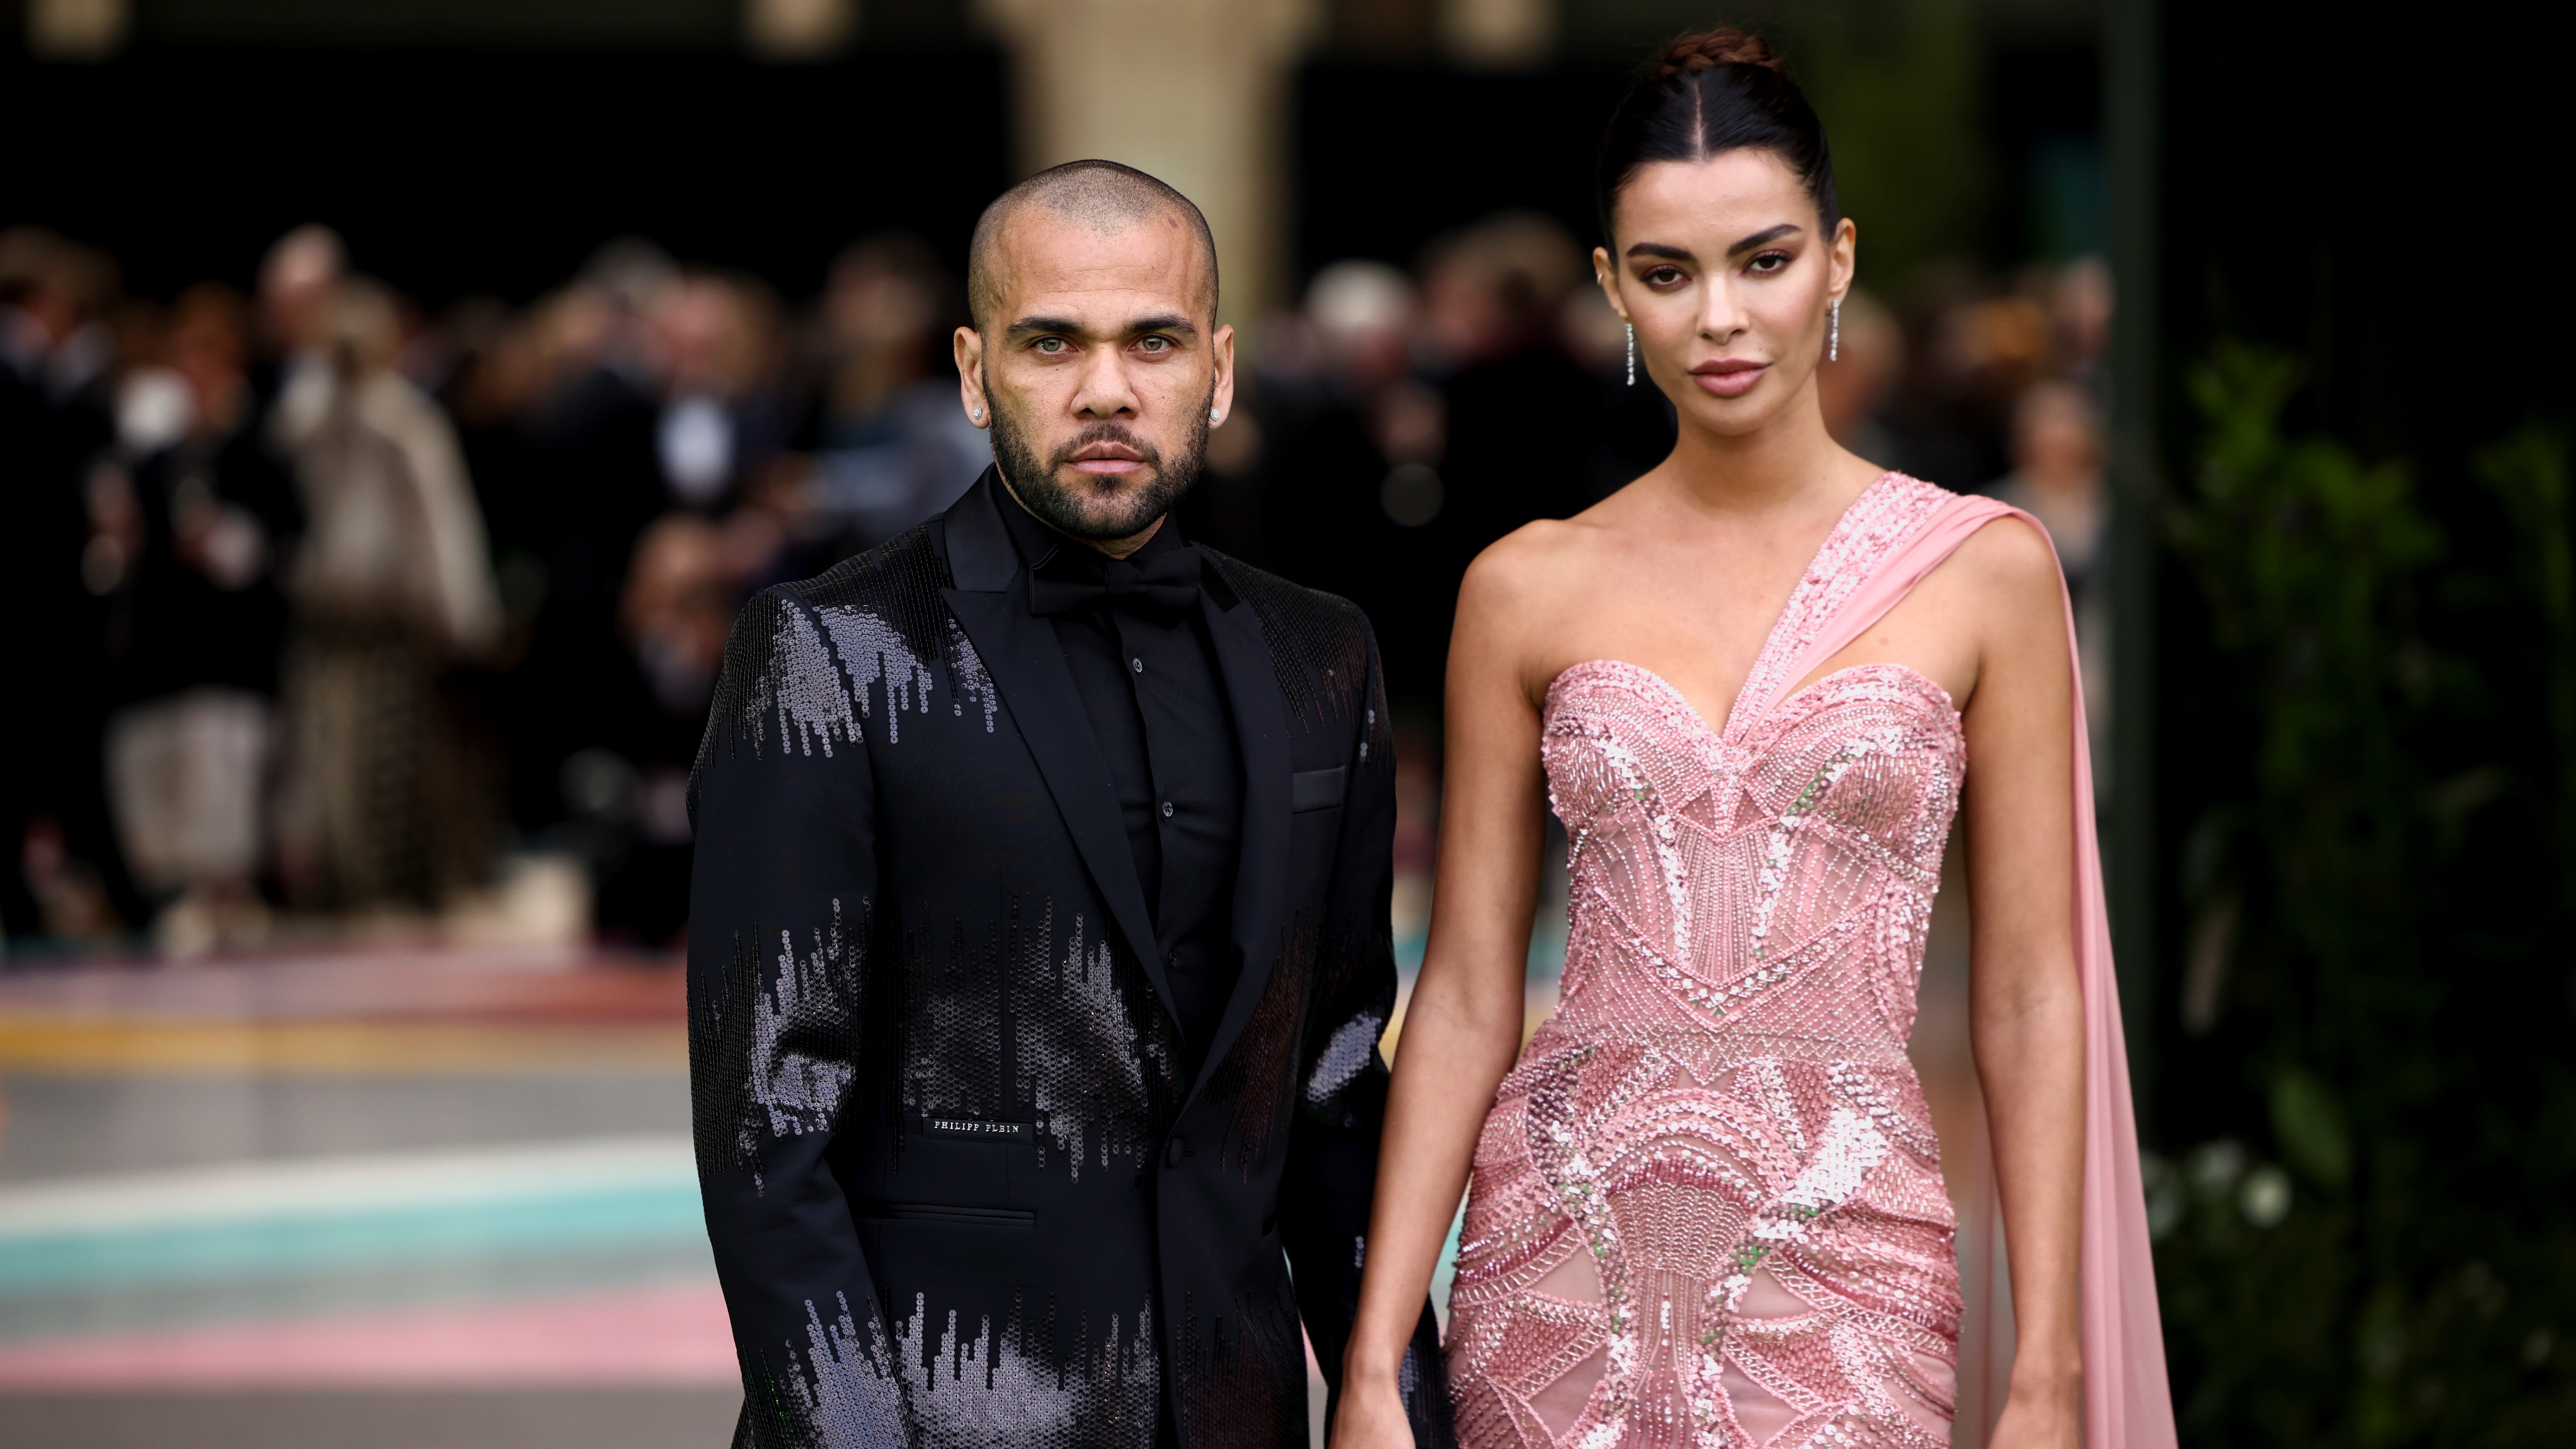 Football player Dani Alves with his wife Joana Sanz arrive at the Earthshot awards ceremony in London, Britain October 17, 2021. REUTERS/Henry Nicholls